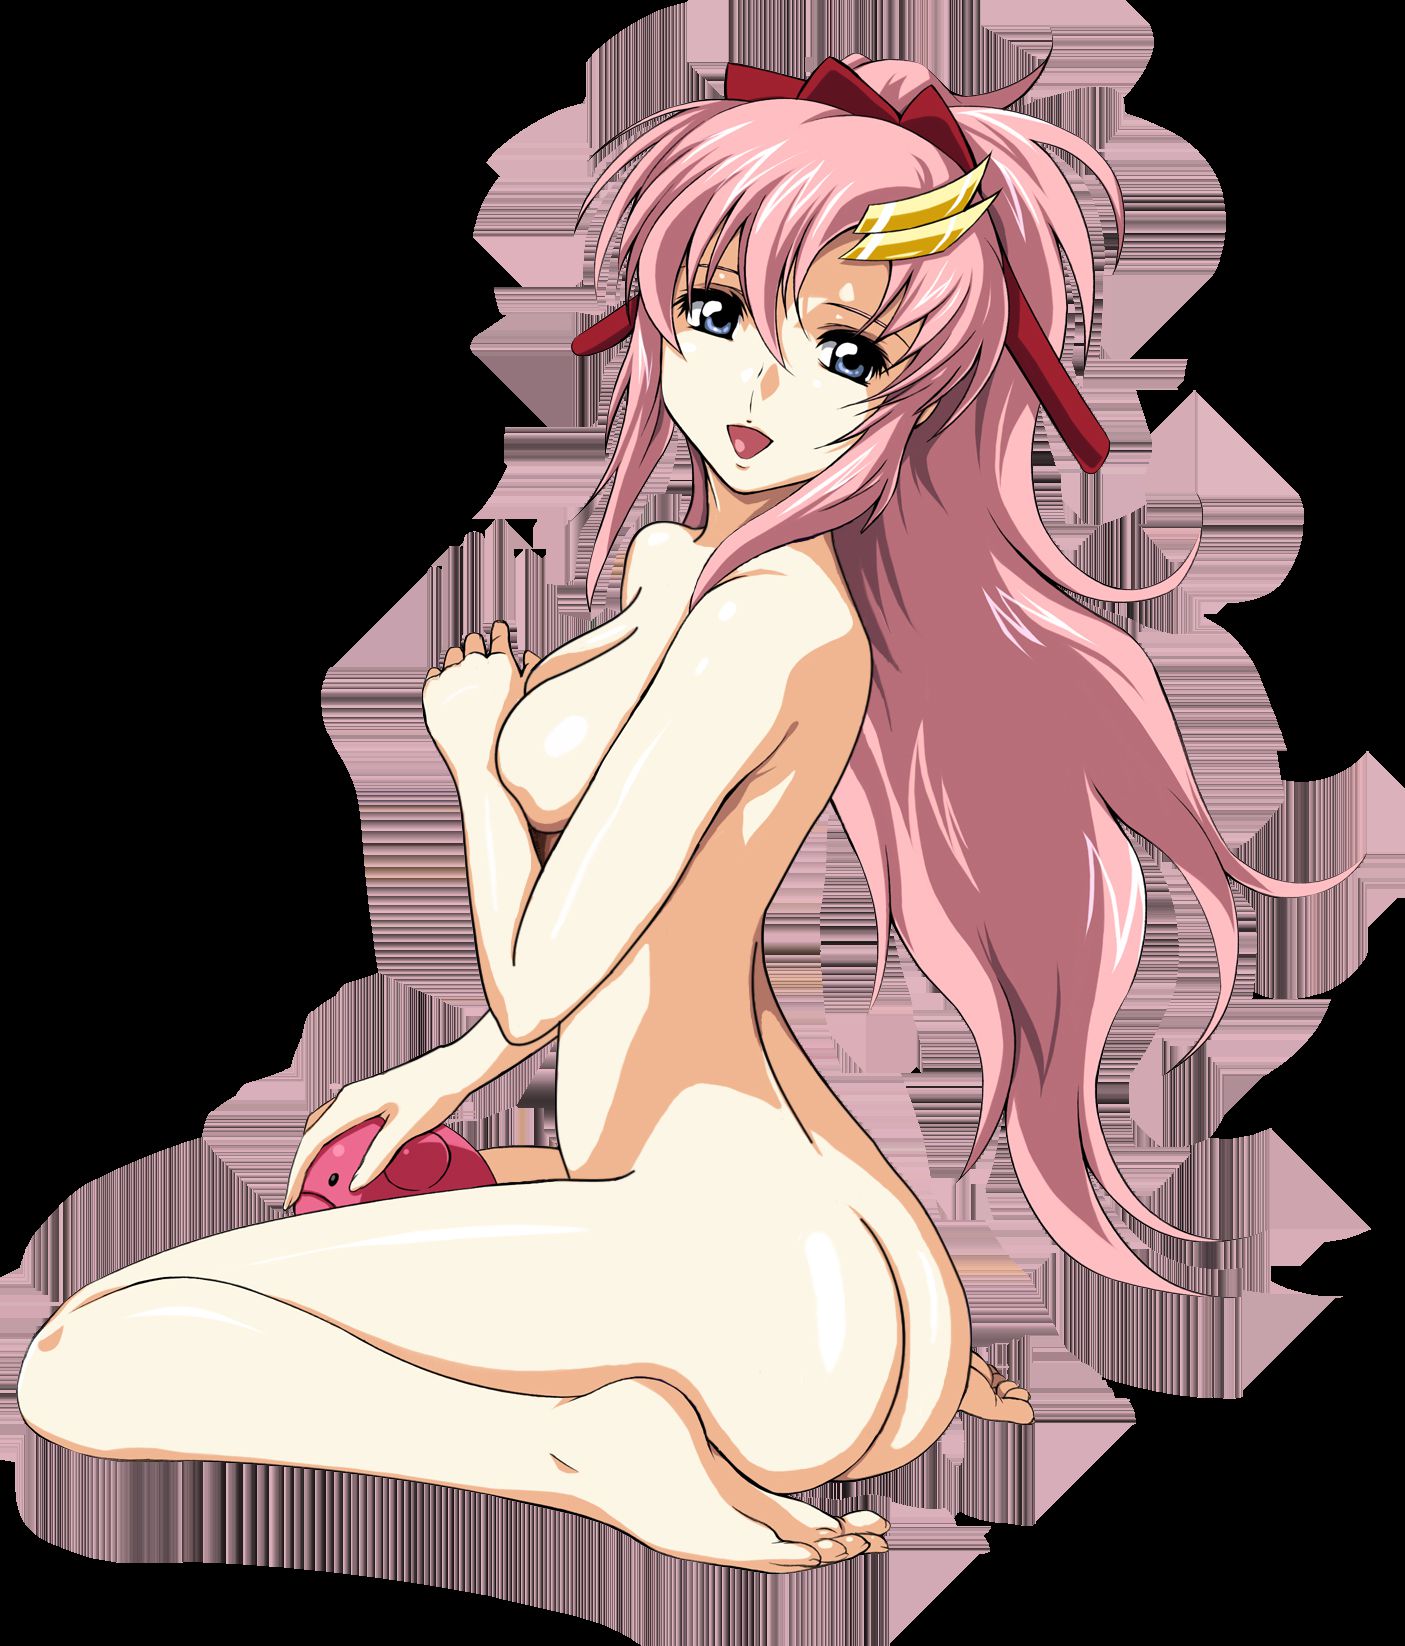 [Erotica character material] PNG background transmission erotic image such as anime character Part 314 11